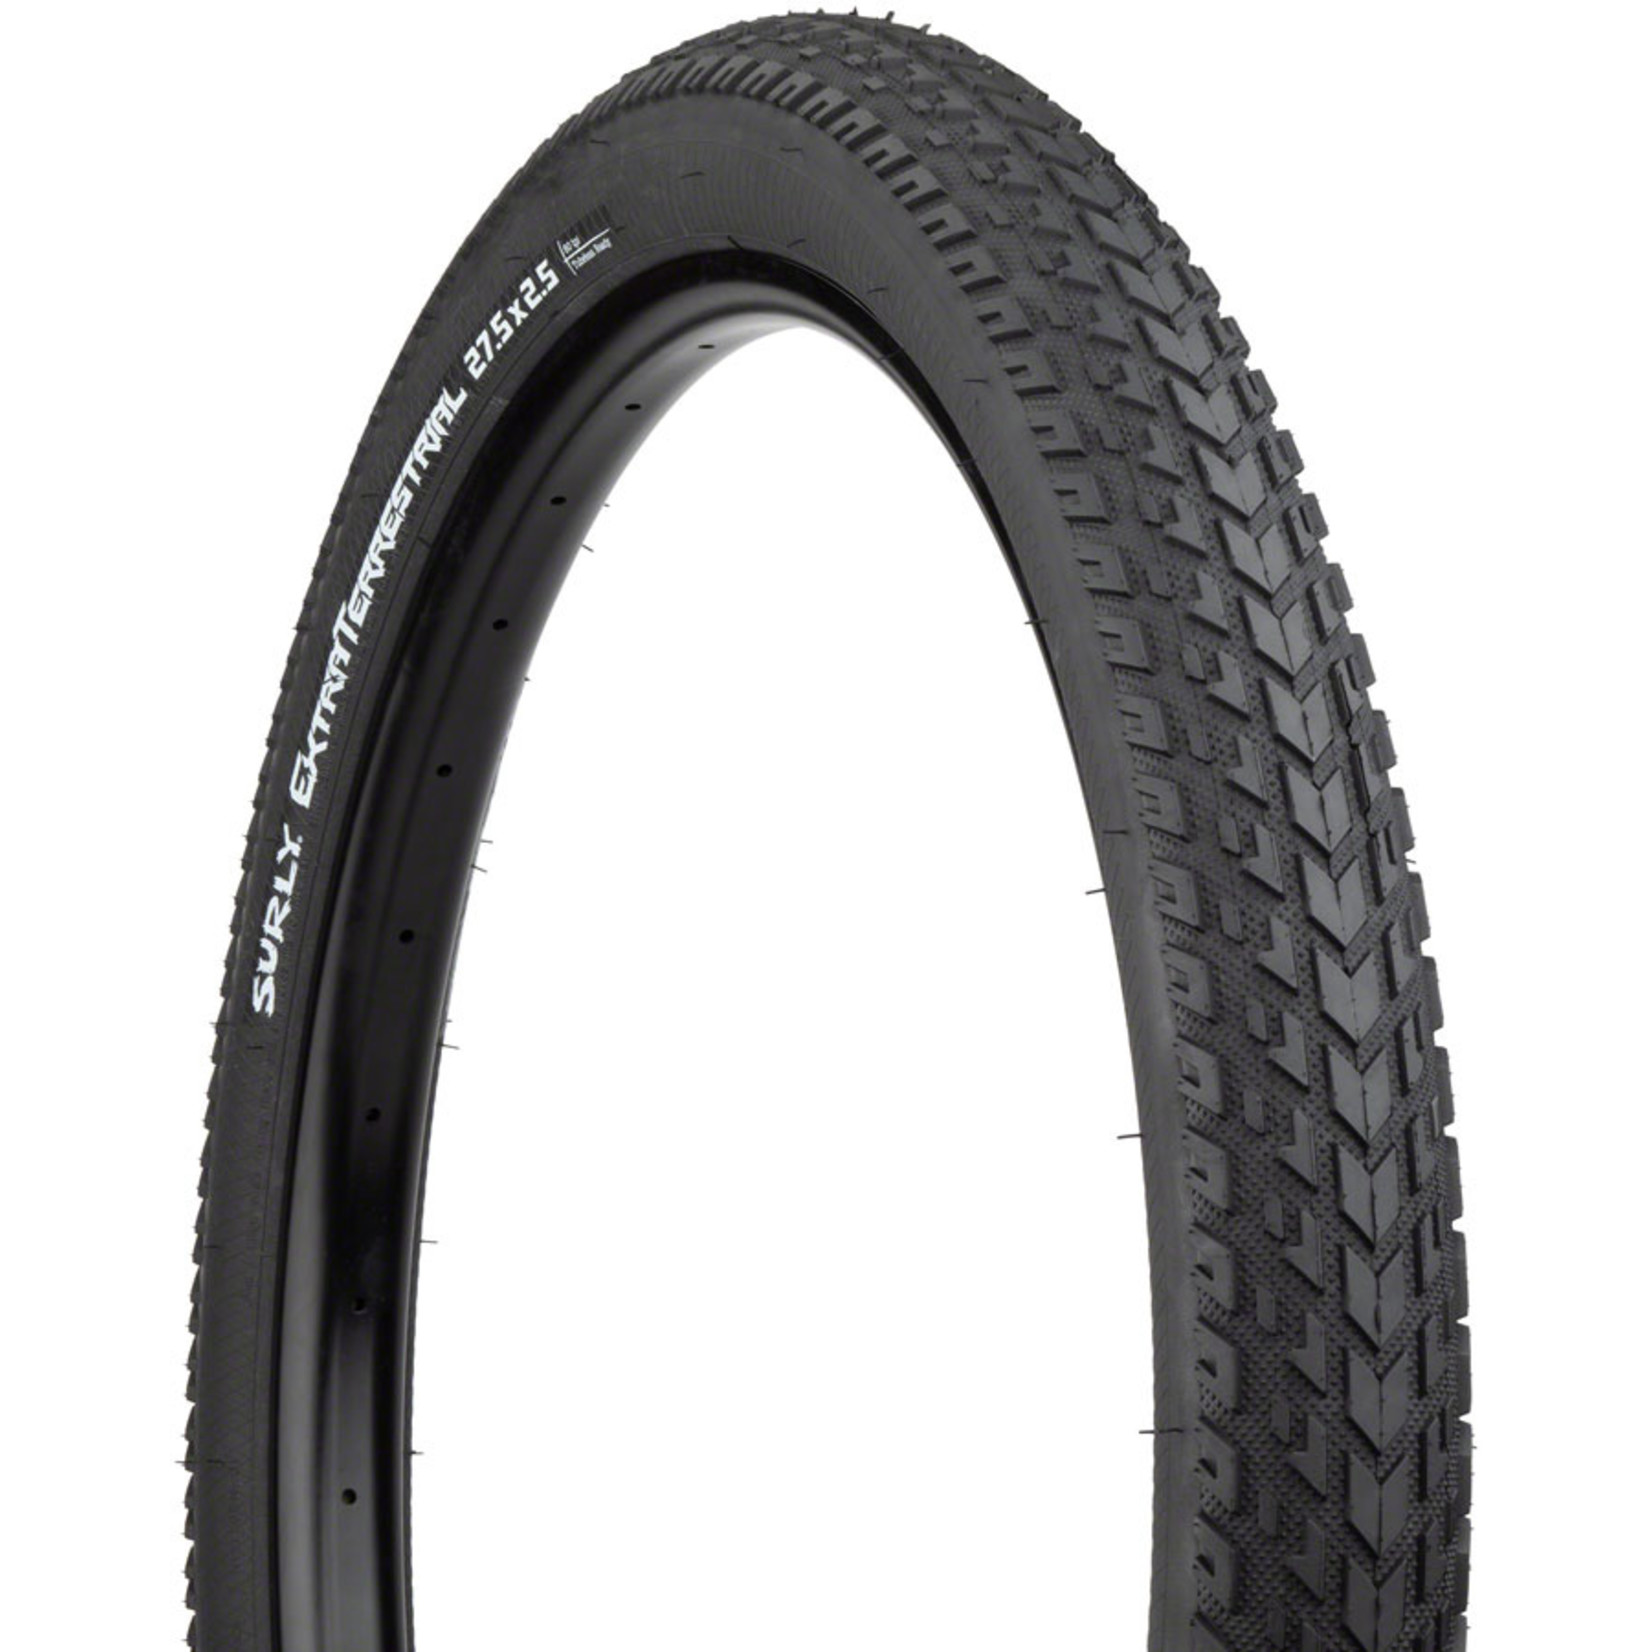 Surly Surly ExtraTerrestrial Tire - 27.5 x 2.5 Tubeless Folding Black 60tpi